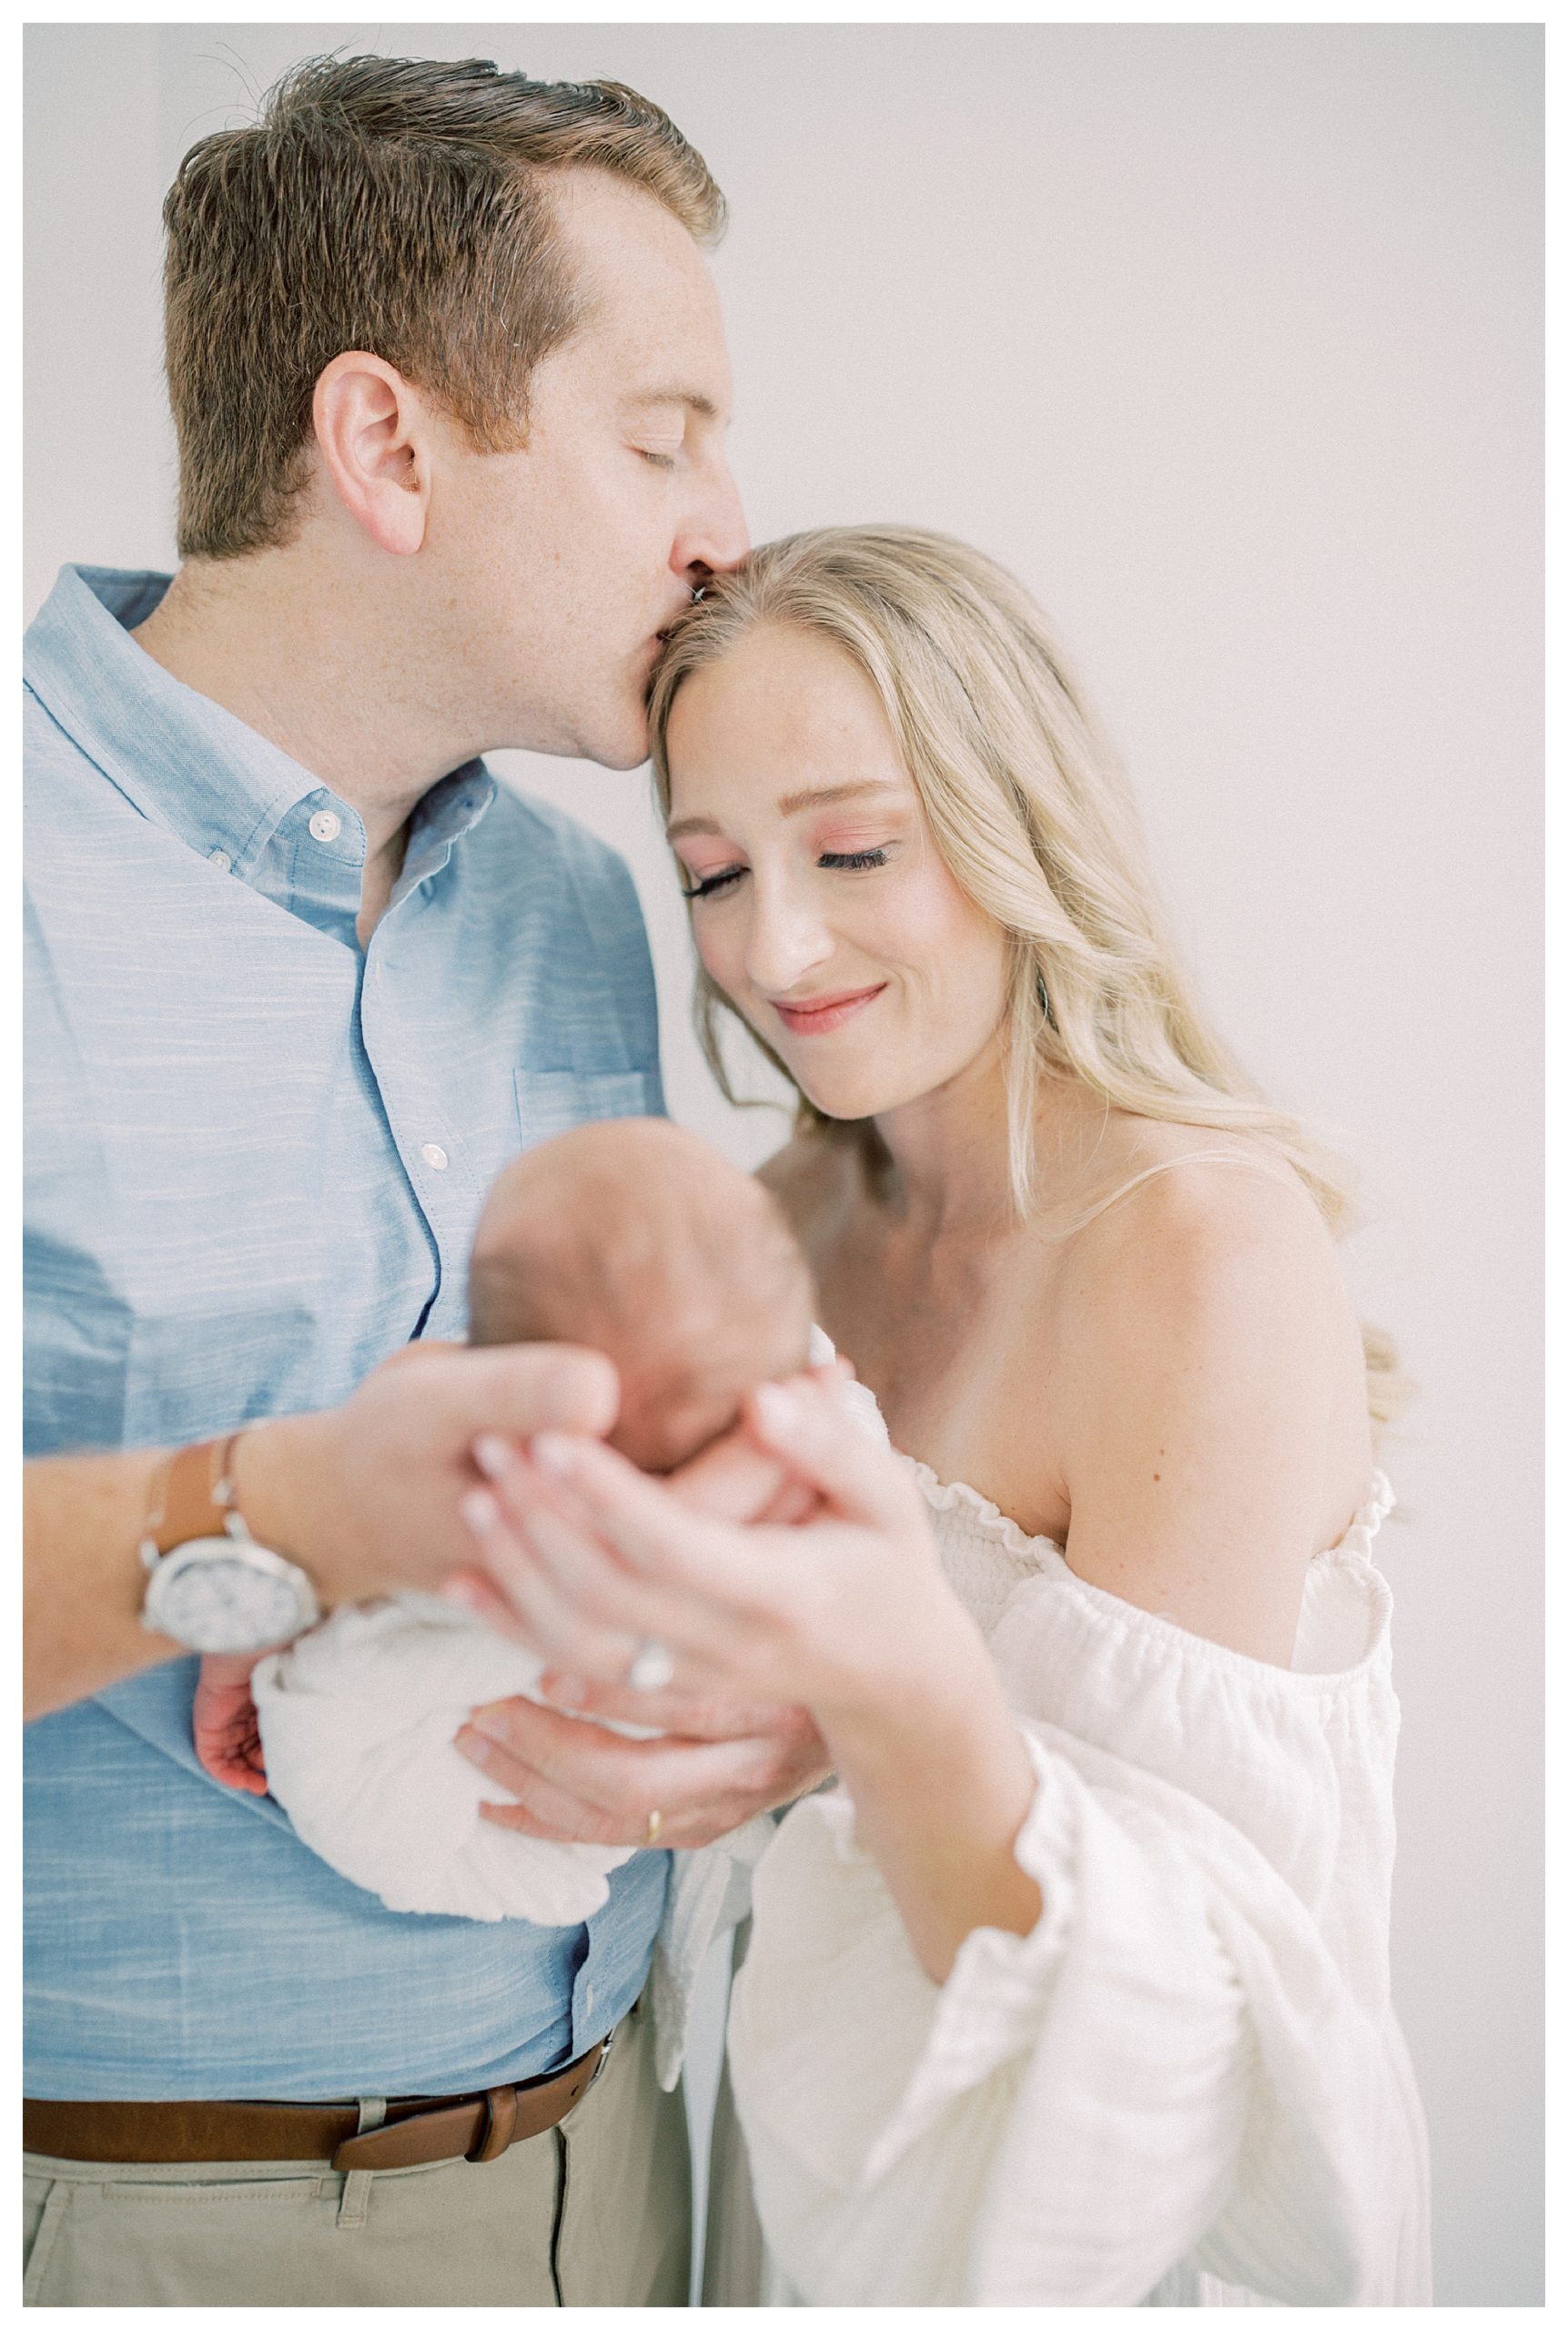 Father kisses his wife's head as they hold their baby during their DC newborn session.